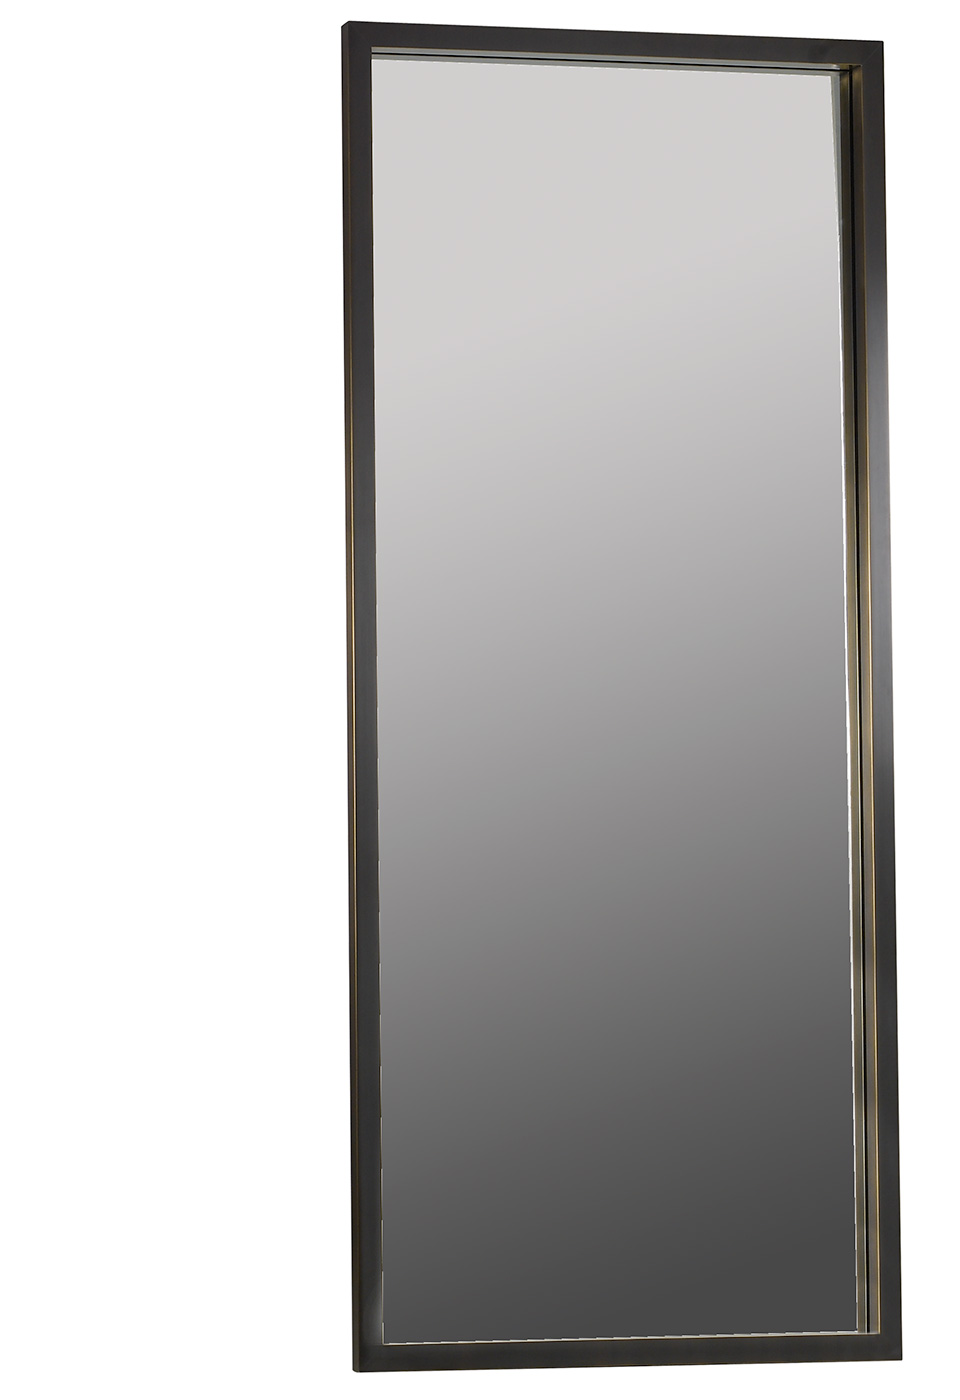 Orfeo is a wall mirror with a bronze structure, from the Promemoria's catalogue | Promemoria